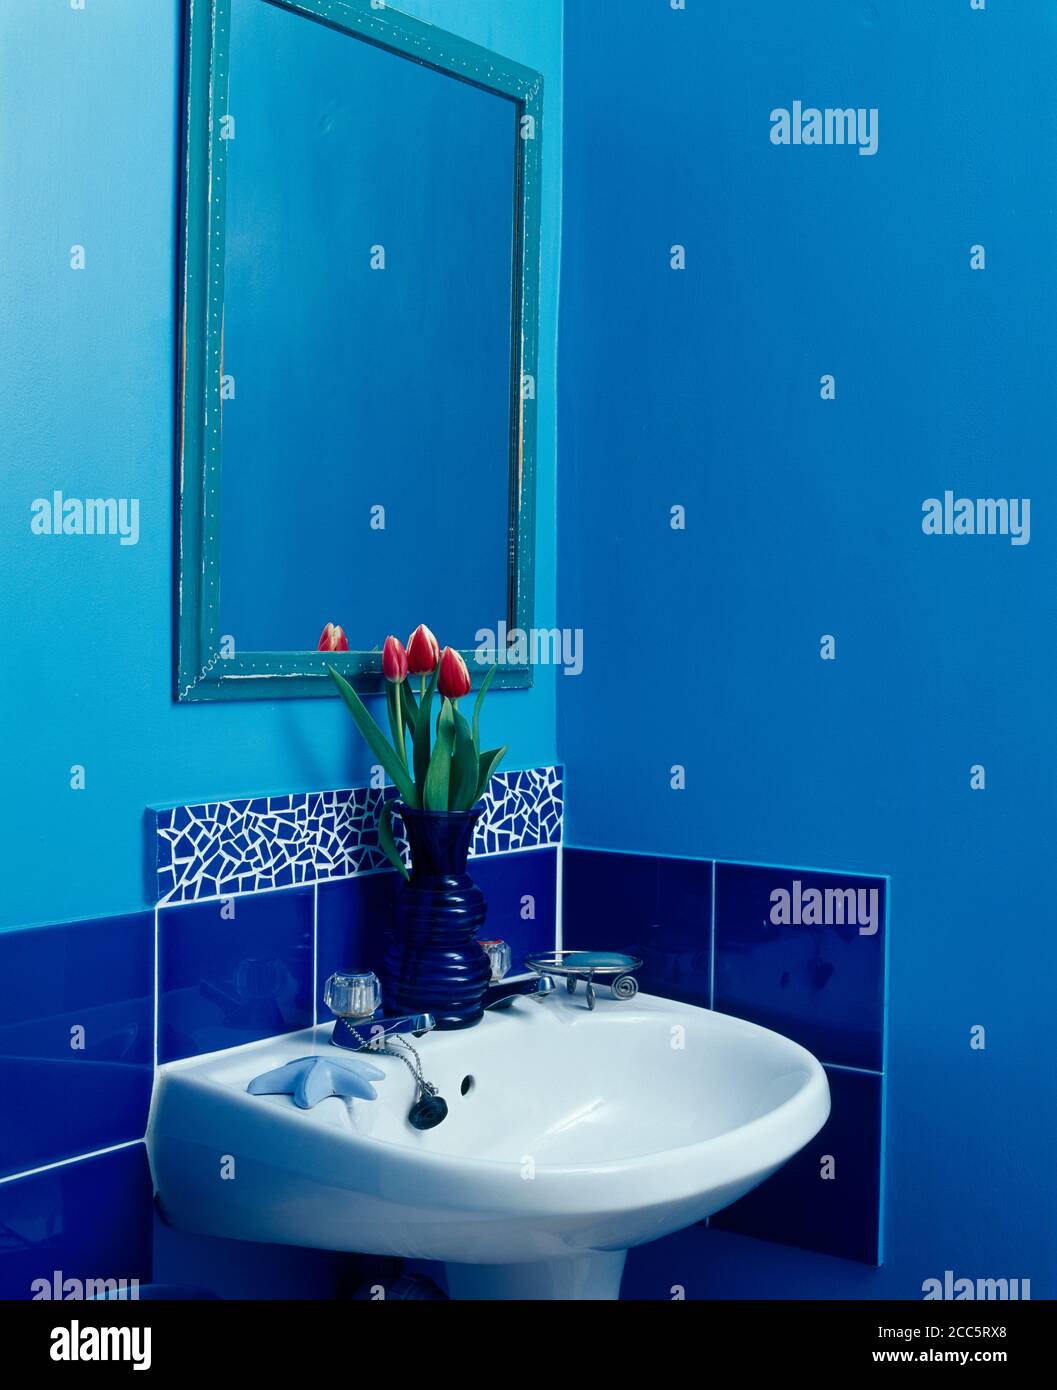 White basin in blue bathroom with blue tiles Stock Photo